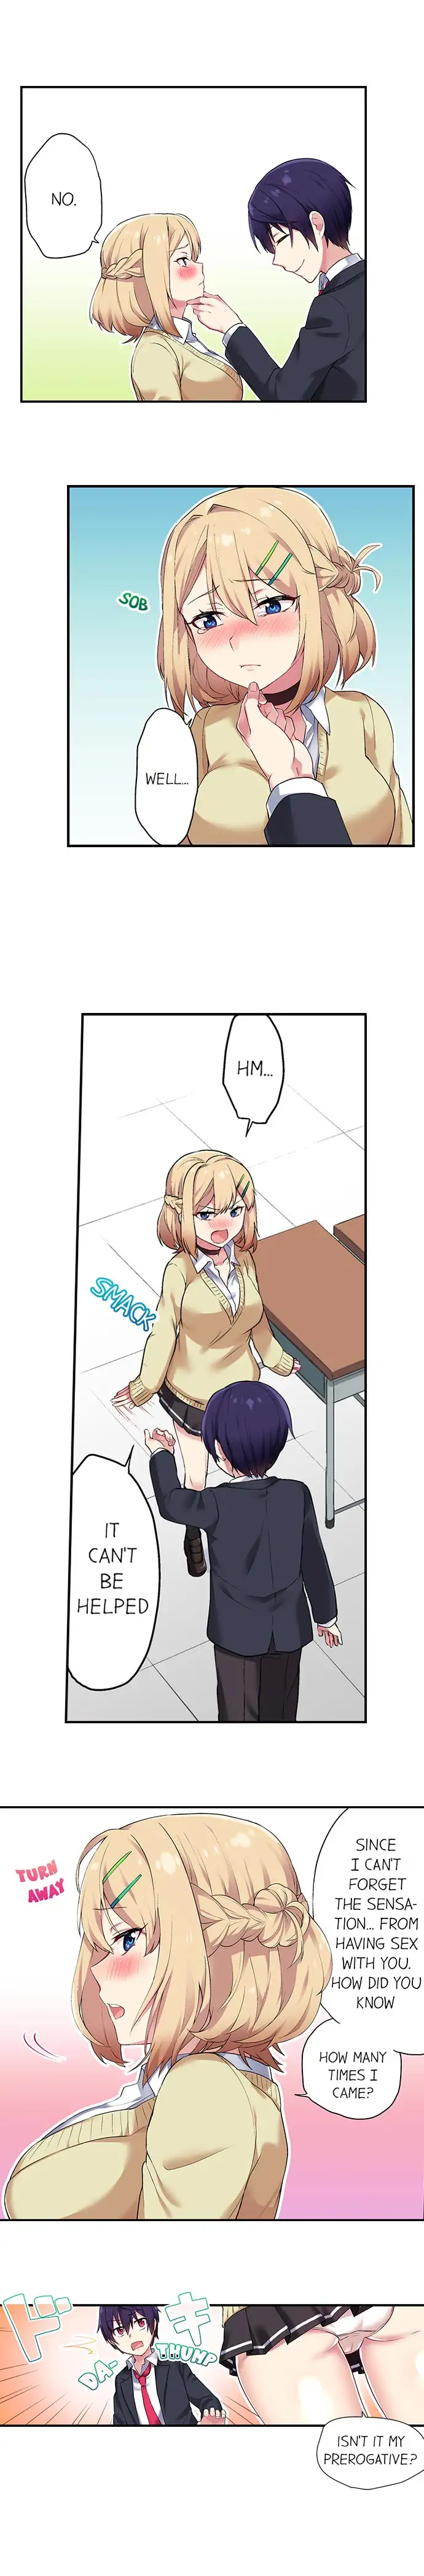 Committee Chairman, Didn’t You Just Masturbate In the Bathroom? I Can See the Number of Times People Orgasm - Chapter 6 Page 4